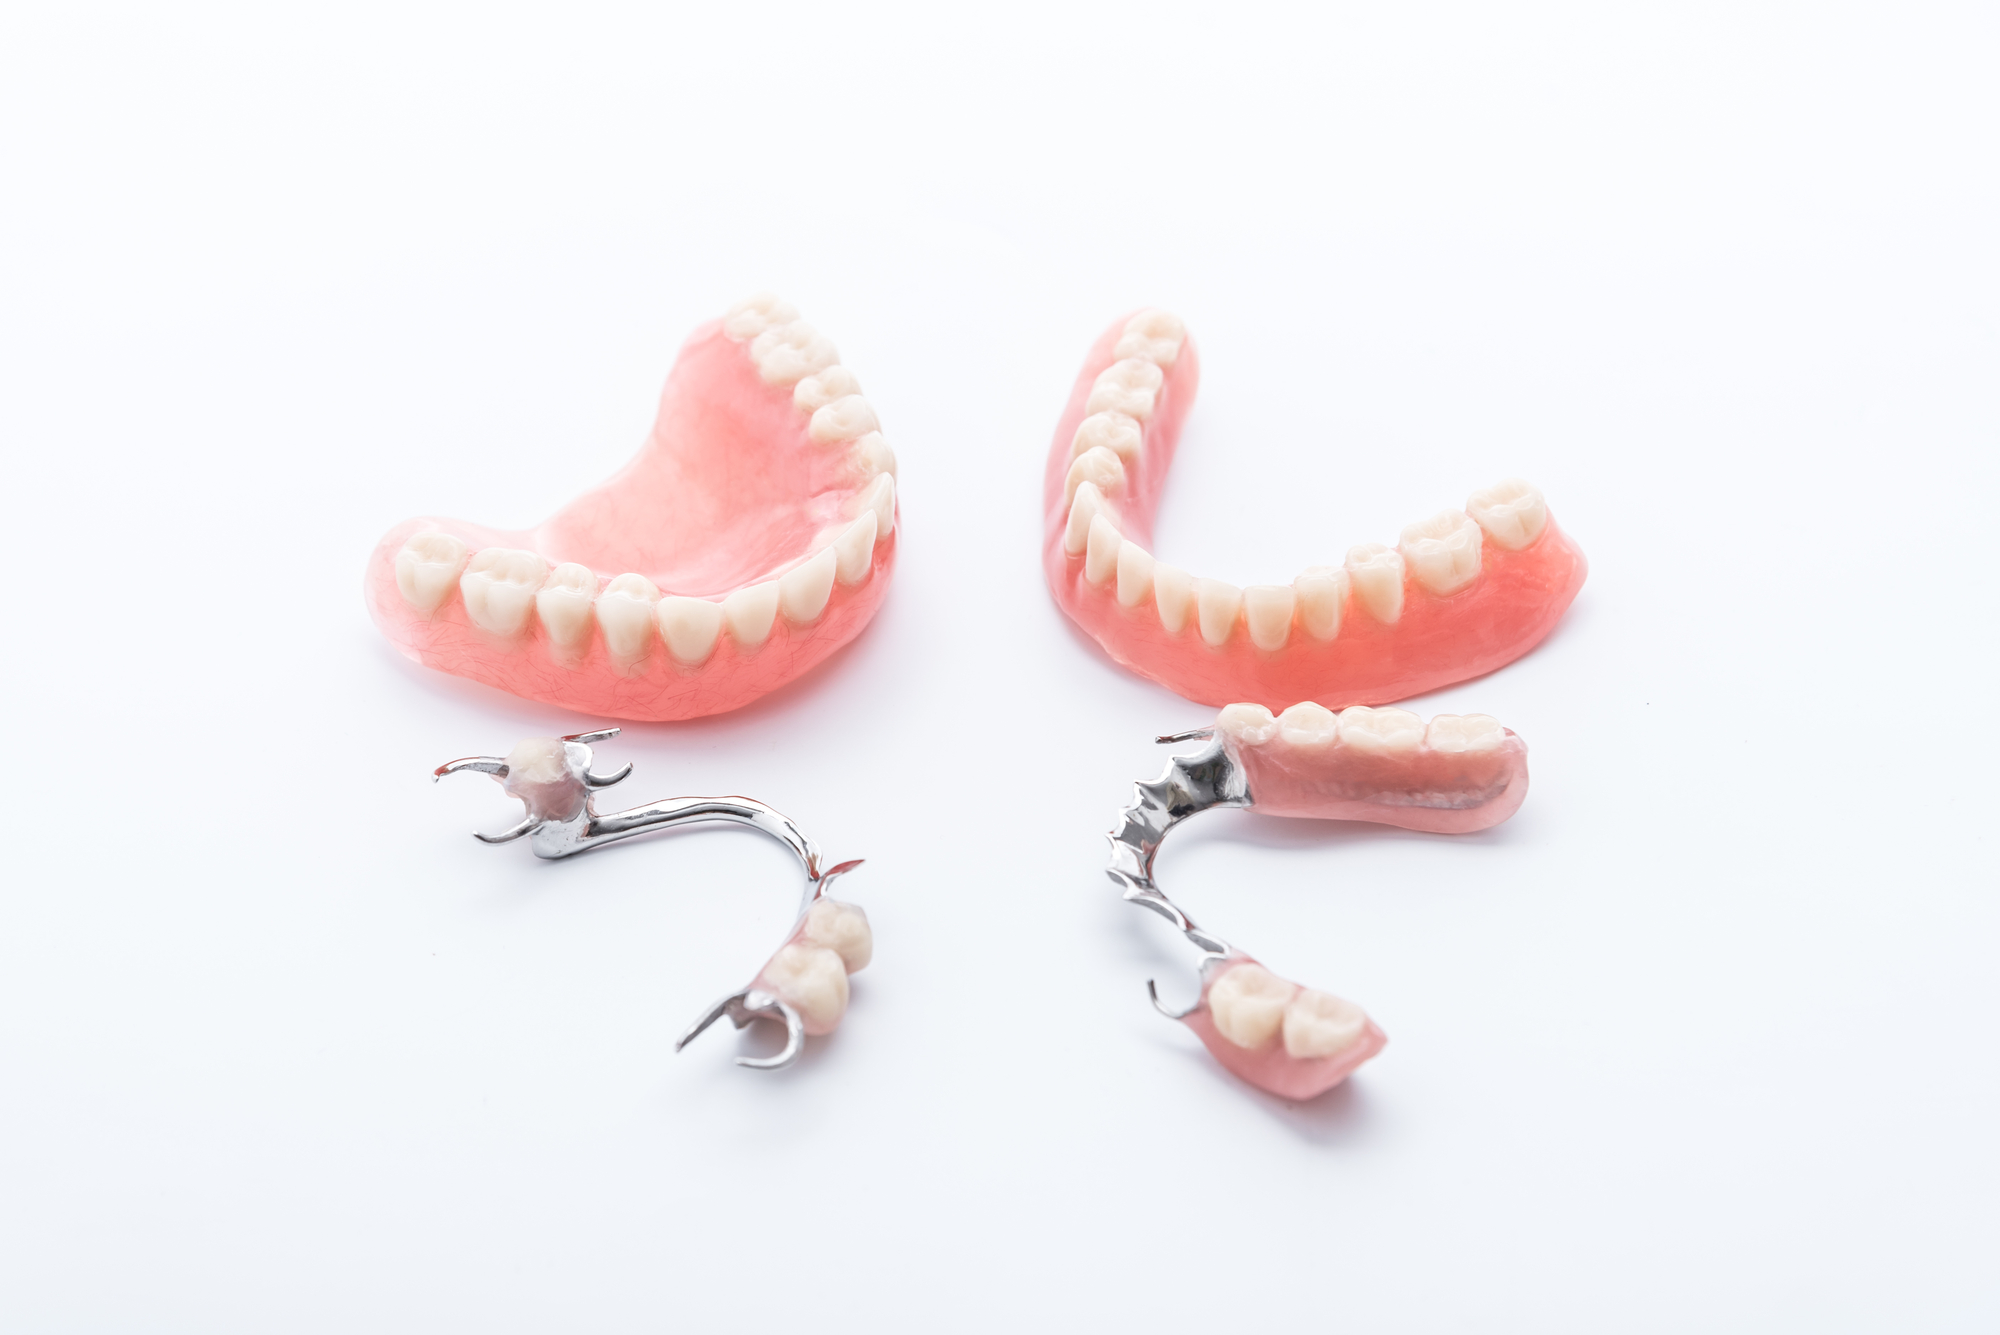 set of dentures and partial dentures on white table